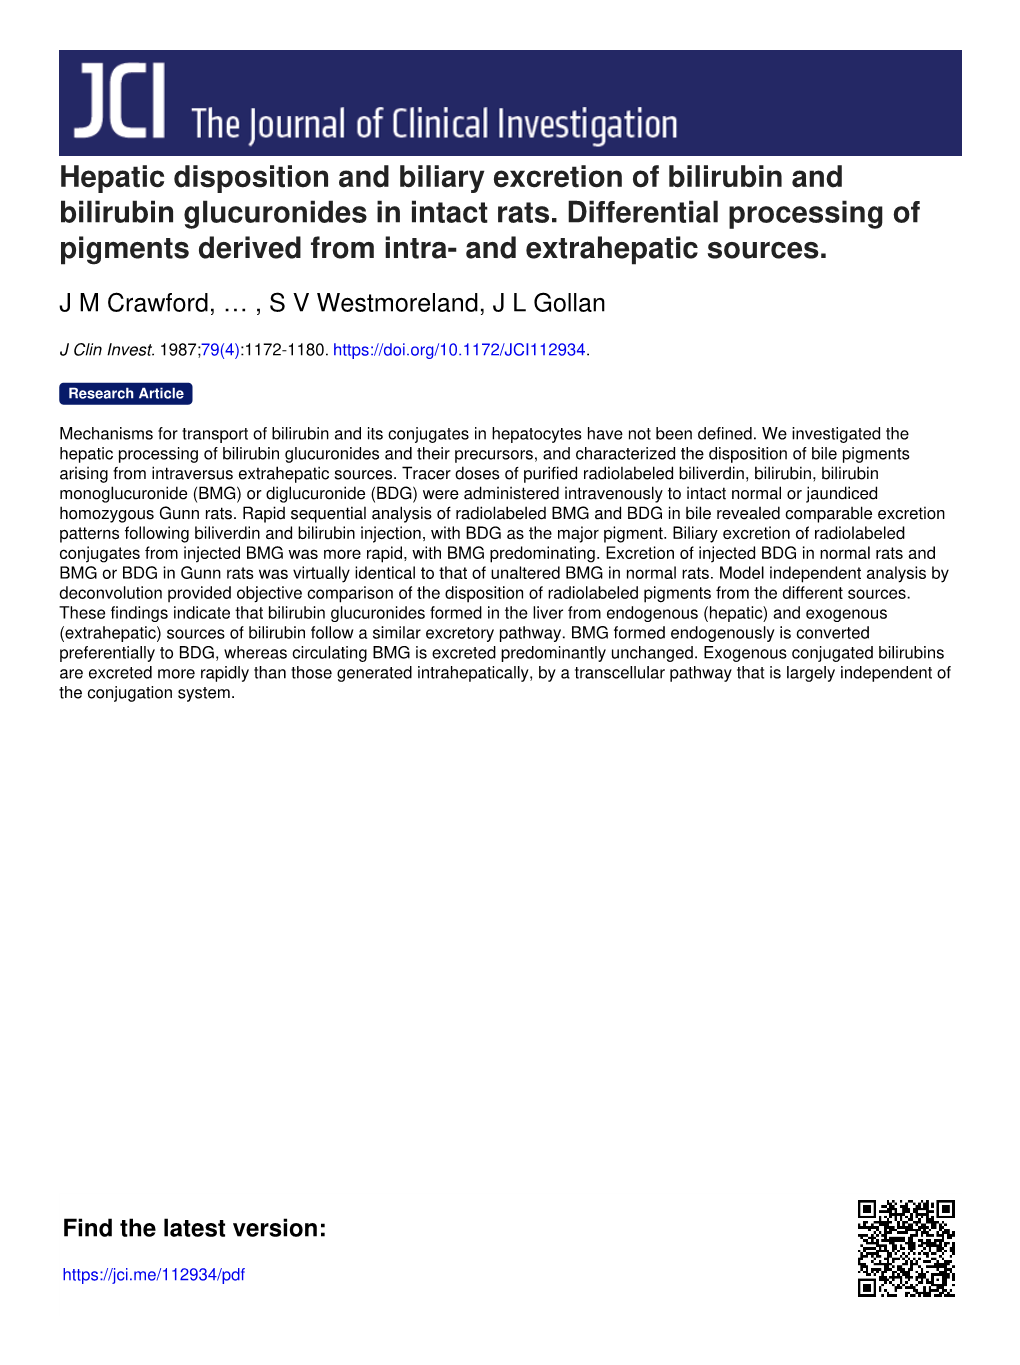 Hepatic Disposition and Biliary Excretion of Bilirubin and Bilirubin Glucuronides in Intact Rats